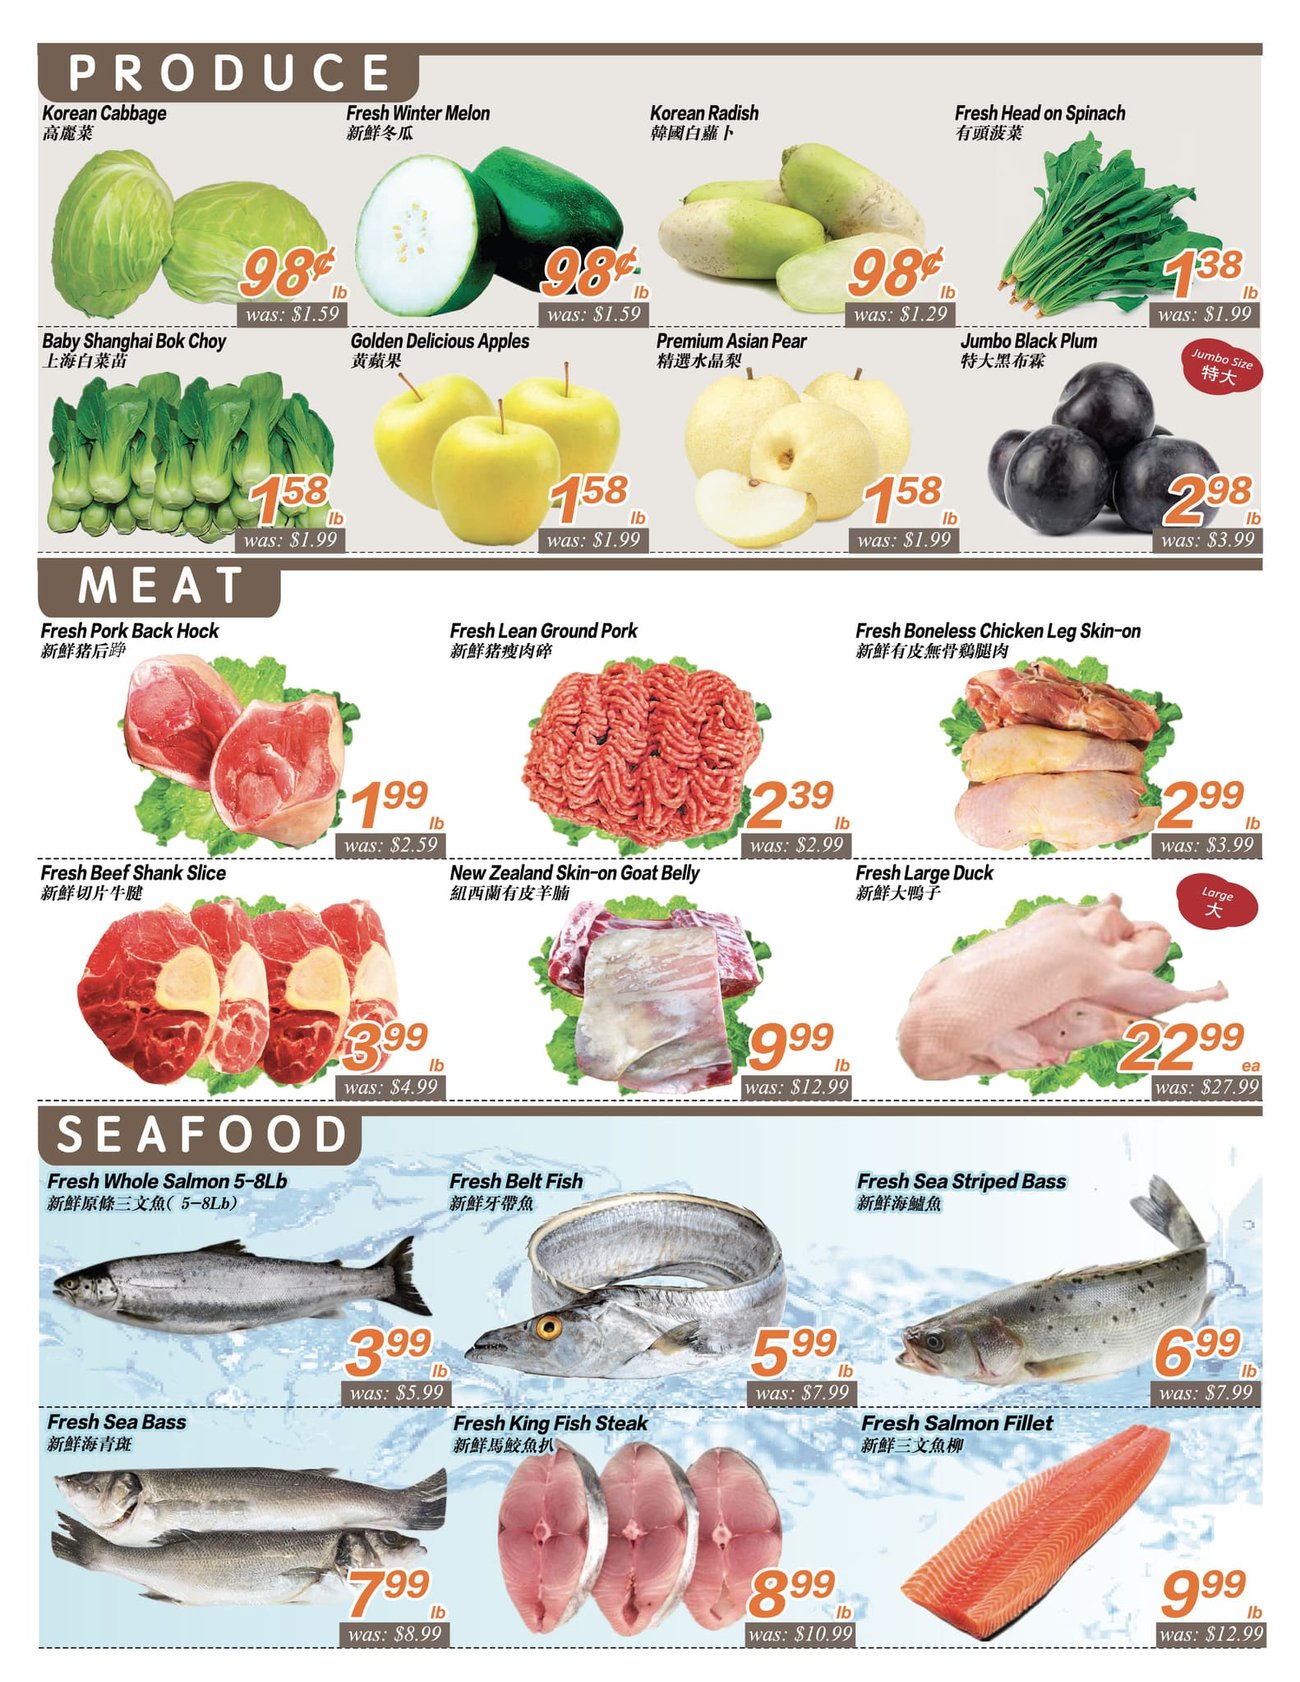 Seasons Foodmart - Thornhill - Weekly Flyer Specials - Page 3